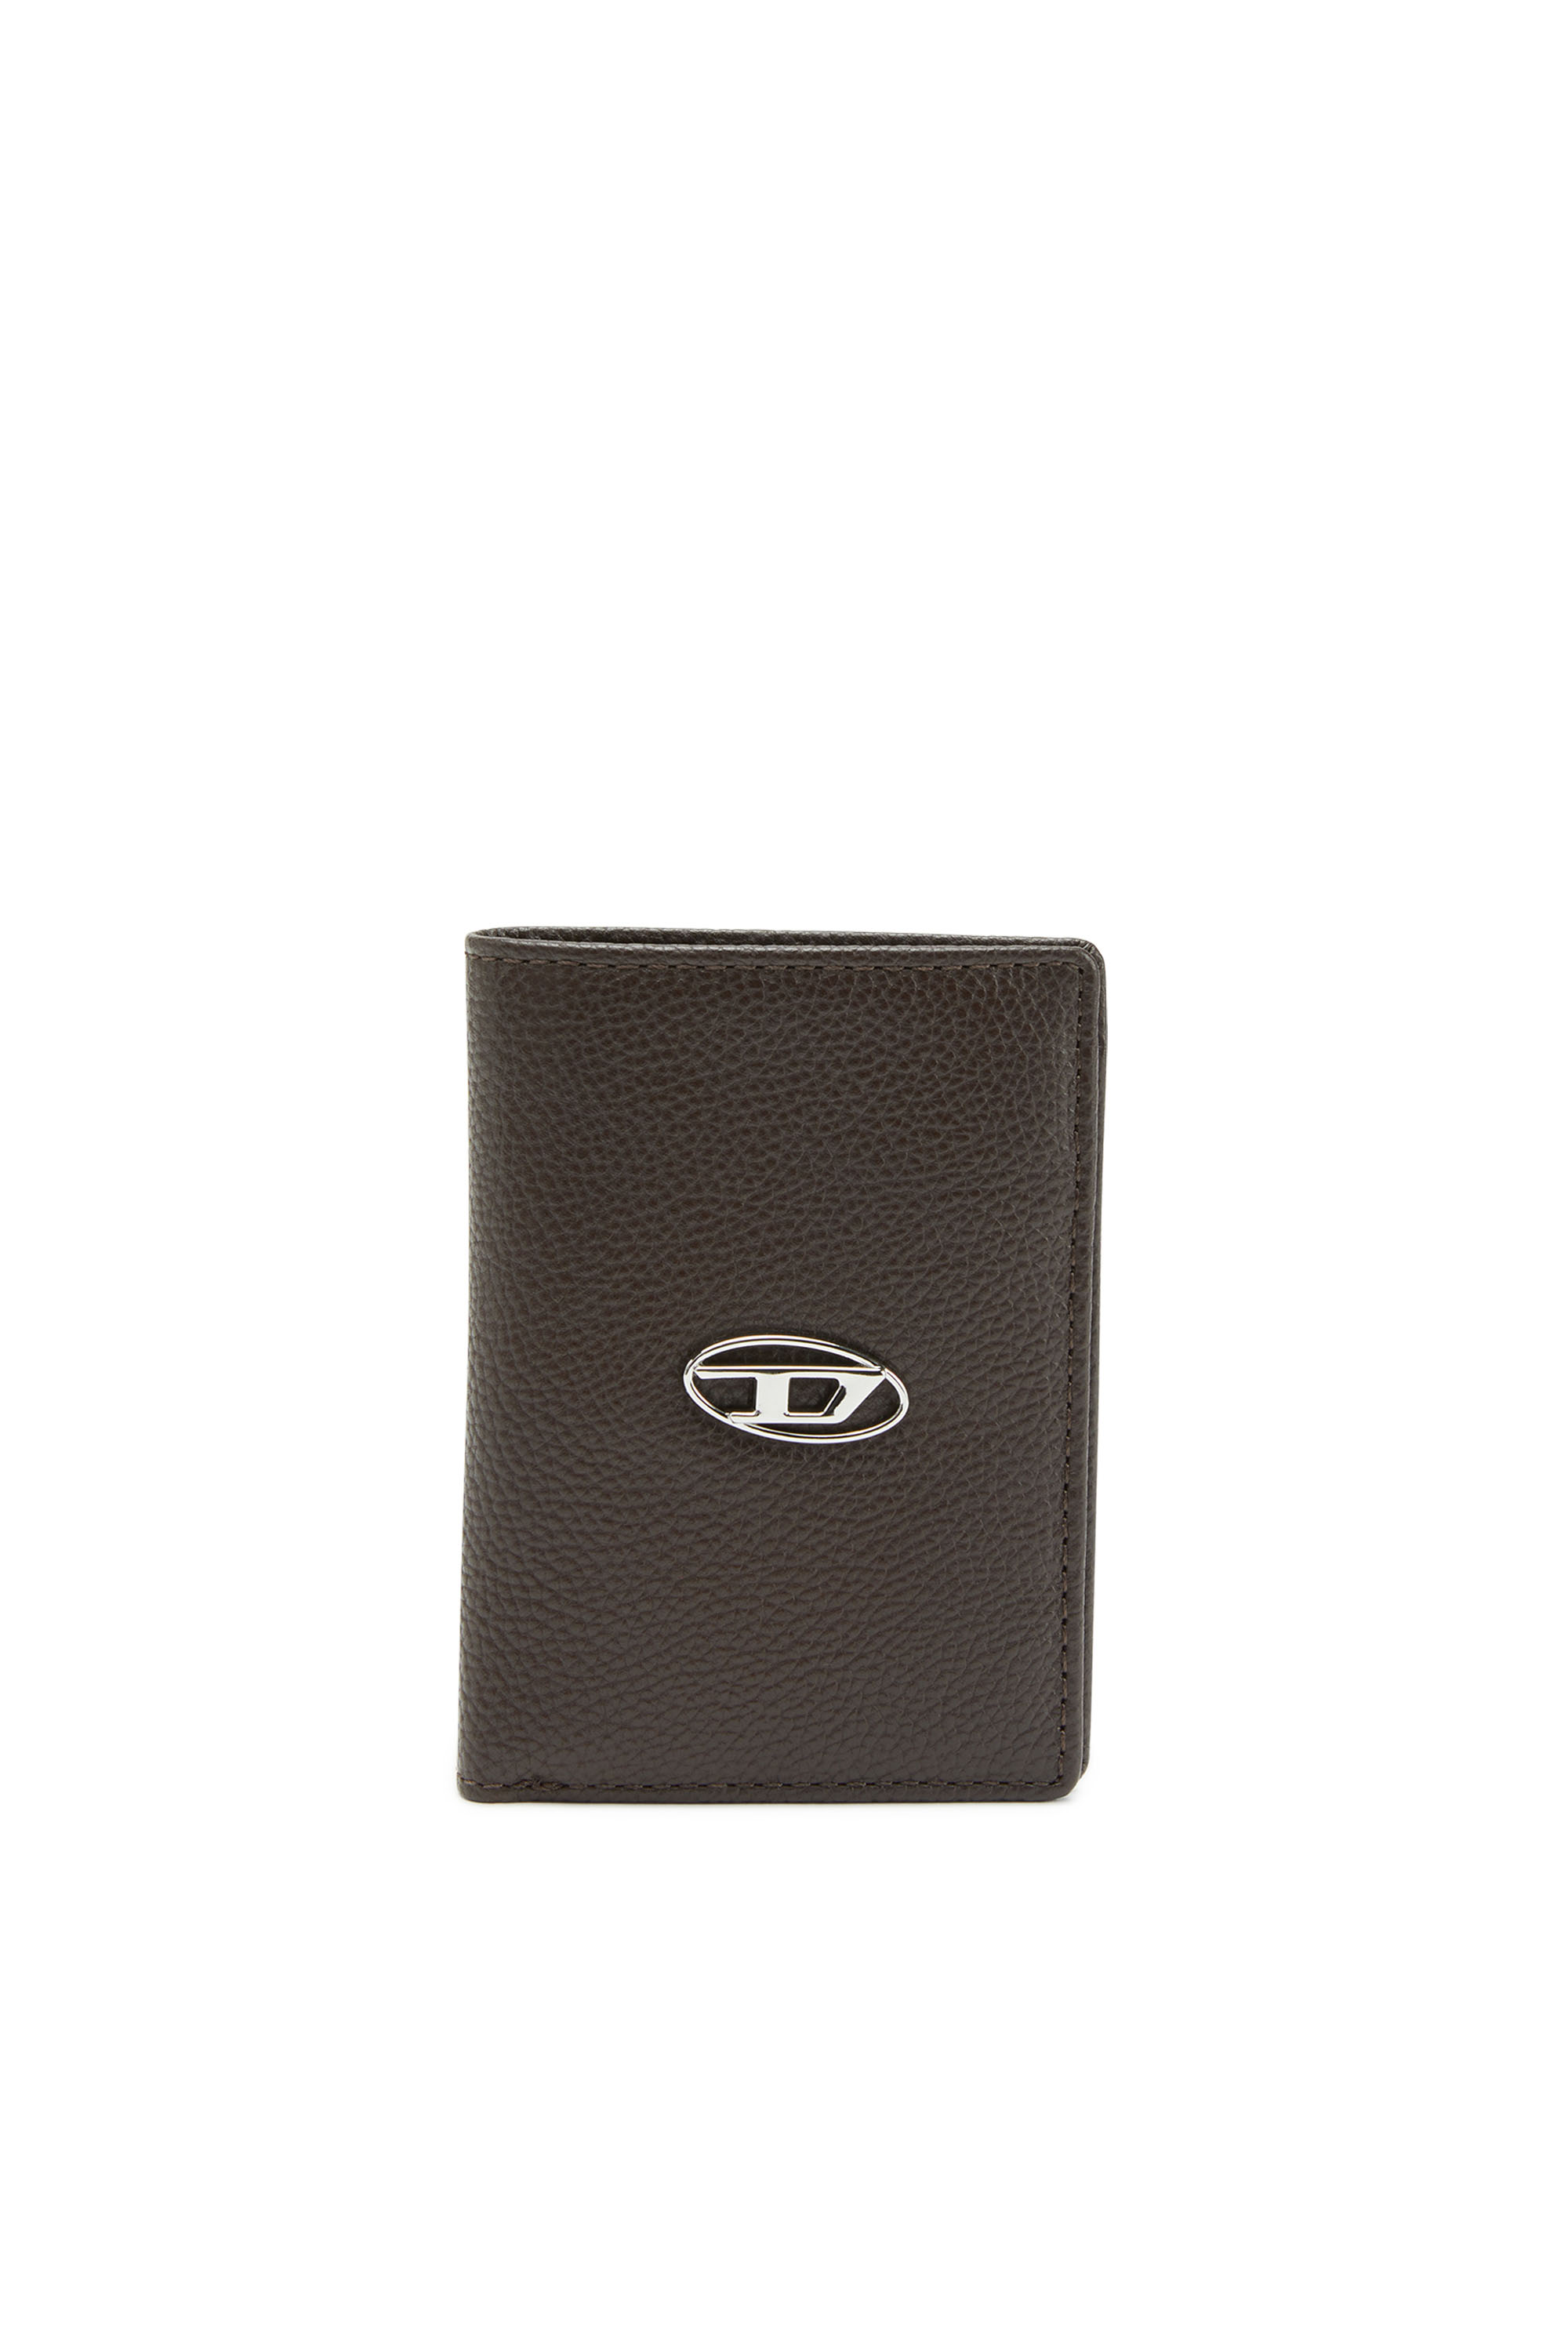 Diesel - Leather bi-fold wallet with logo plaque - Small Wallets - Man - Brown